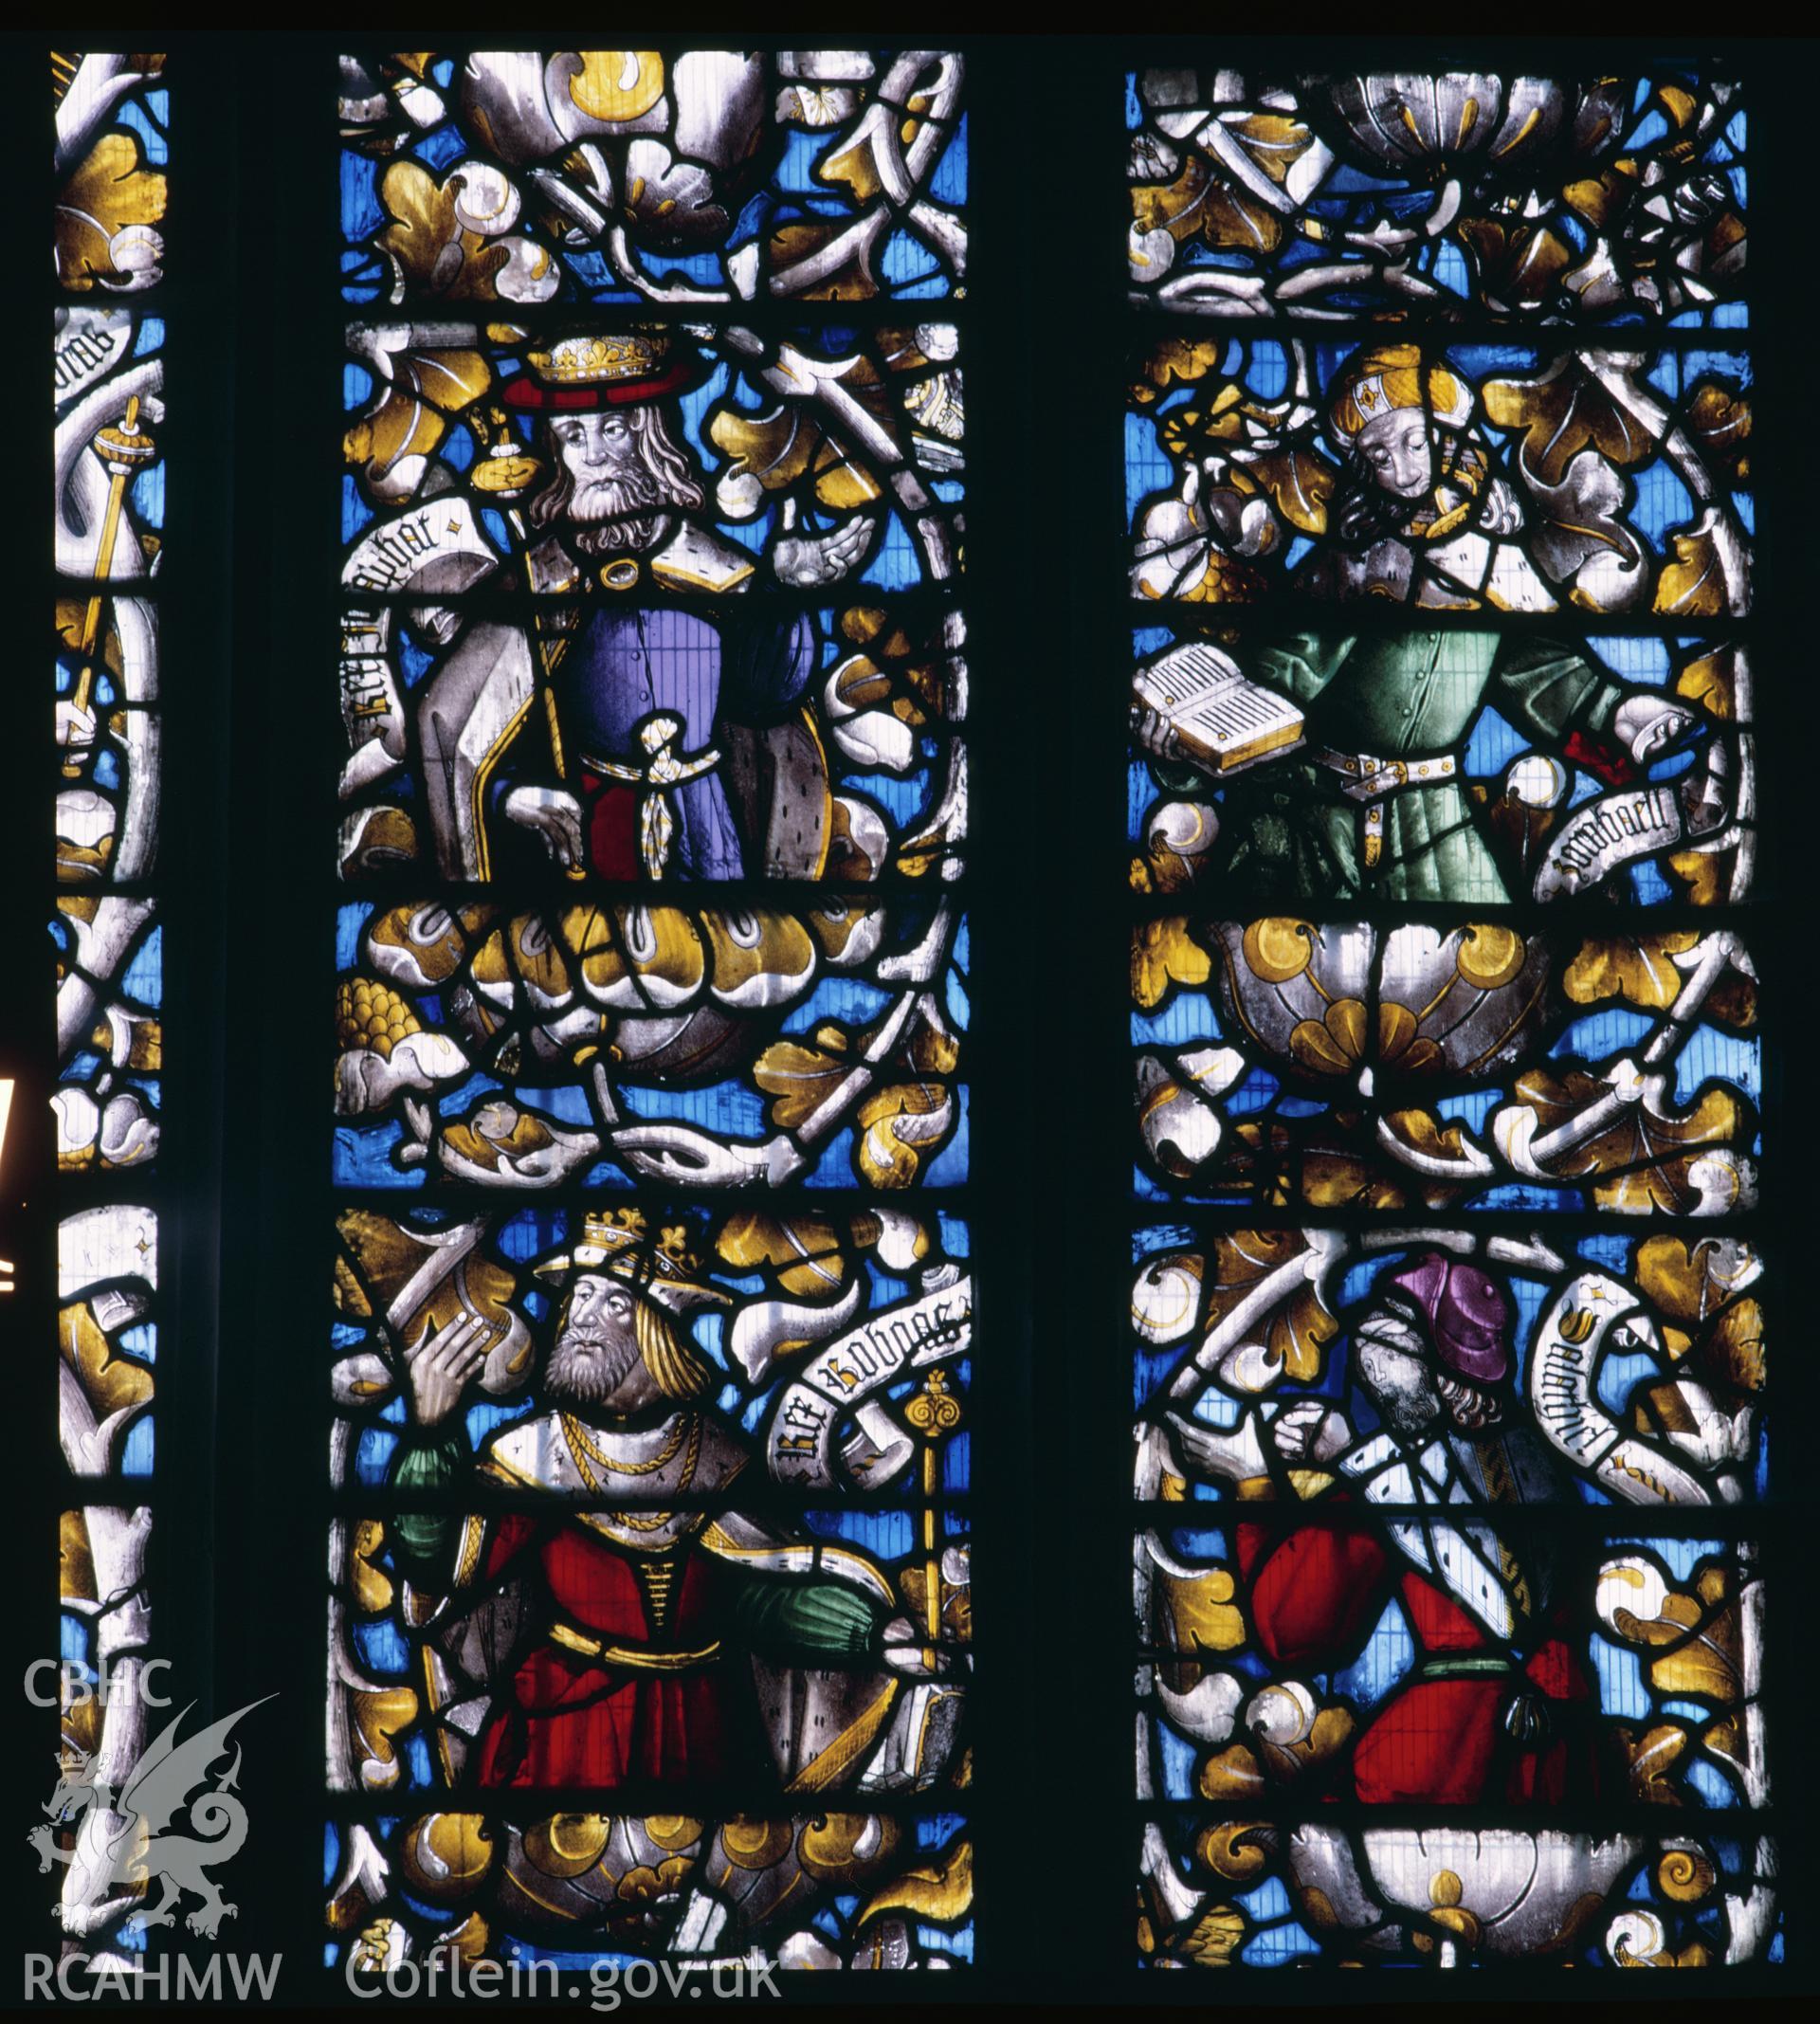 Interior: Stained glass window detail